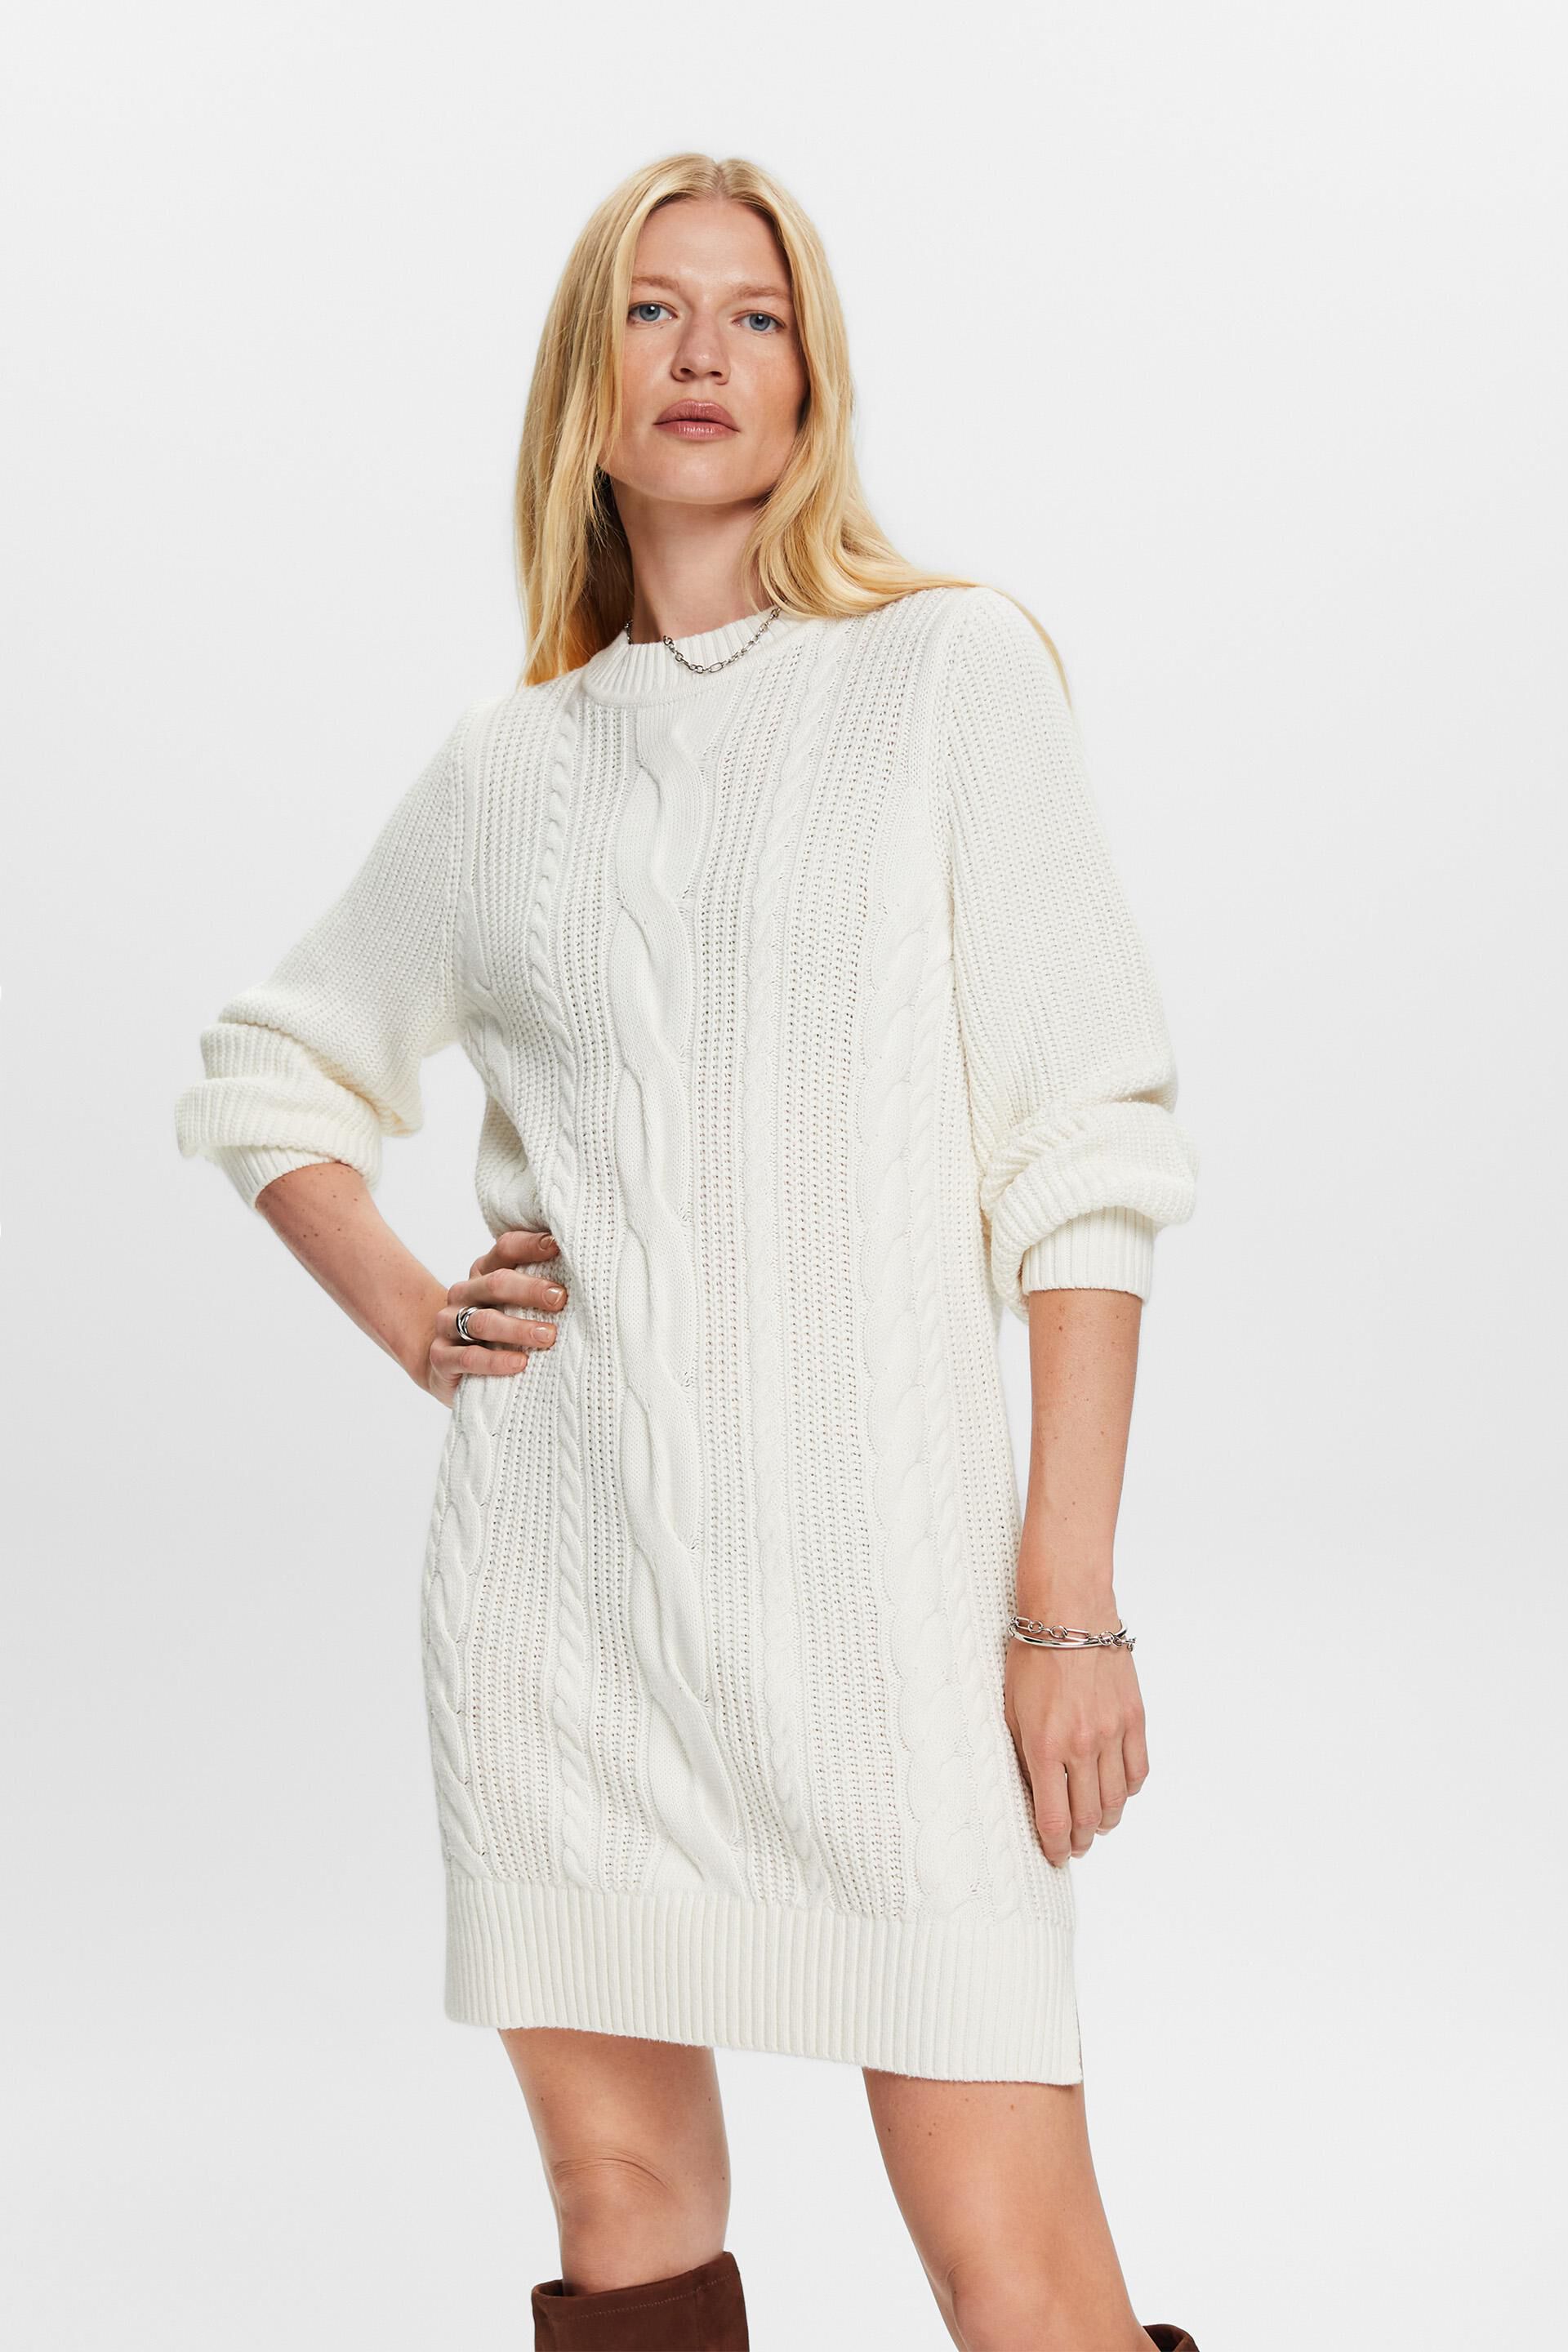 Esprit Cable Dress Sweater Wool-Blend Knit